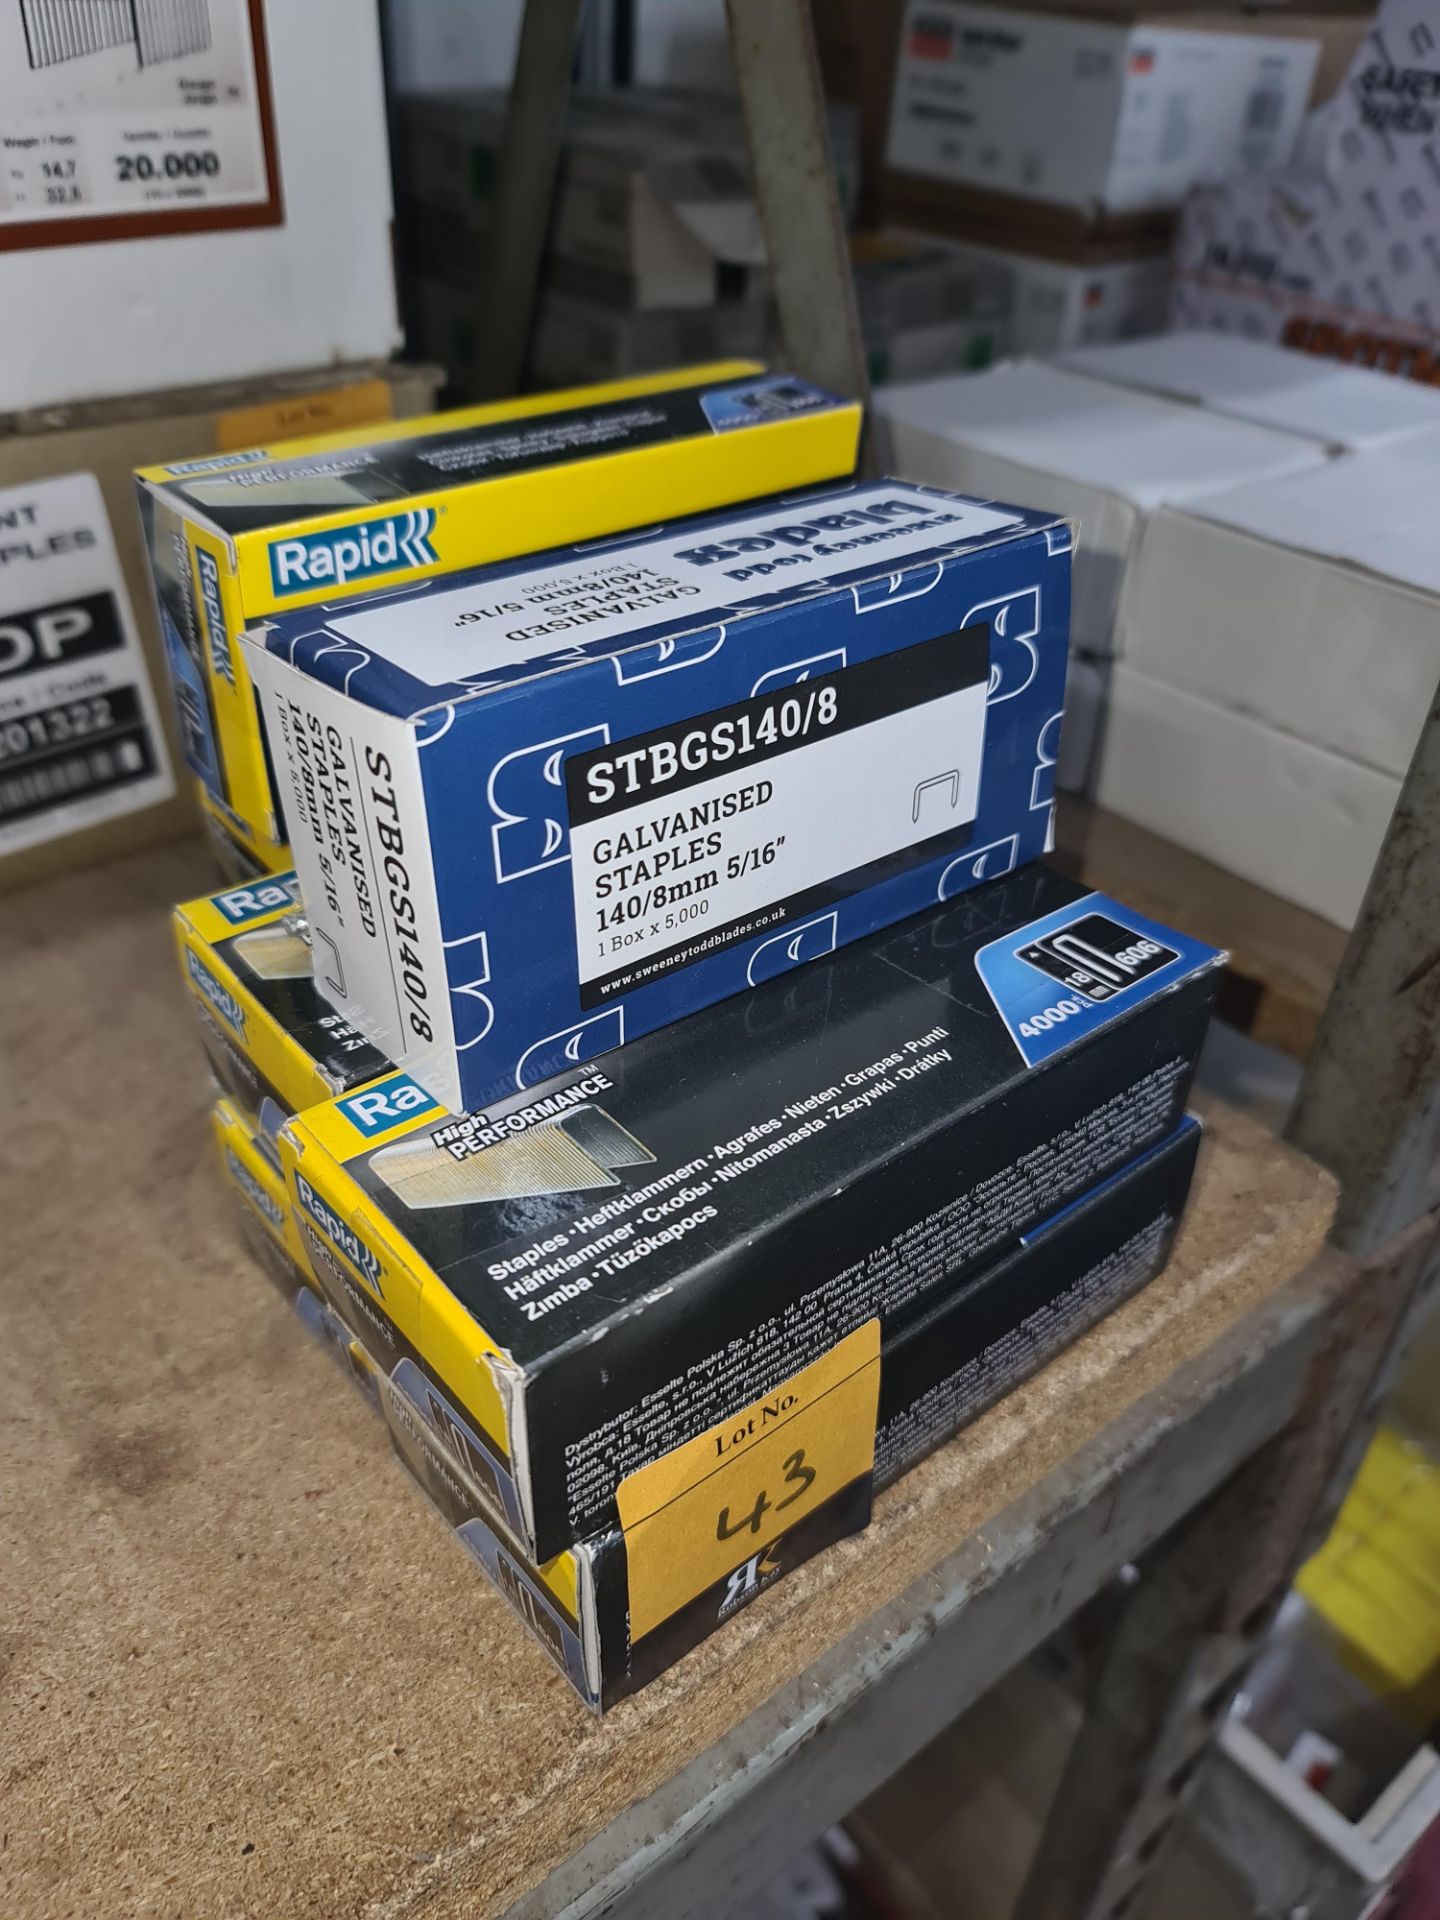 Mixed lot comprising 7 boxes of Rapid High Performance 18mm 606 staples & 1 box of galvanised 140/